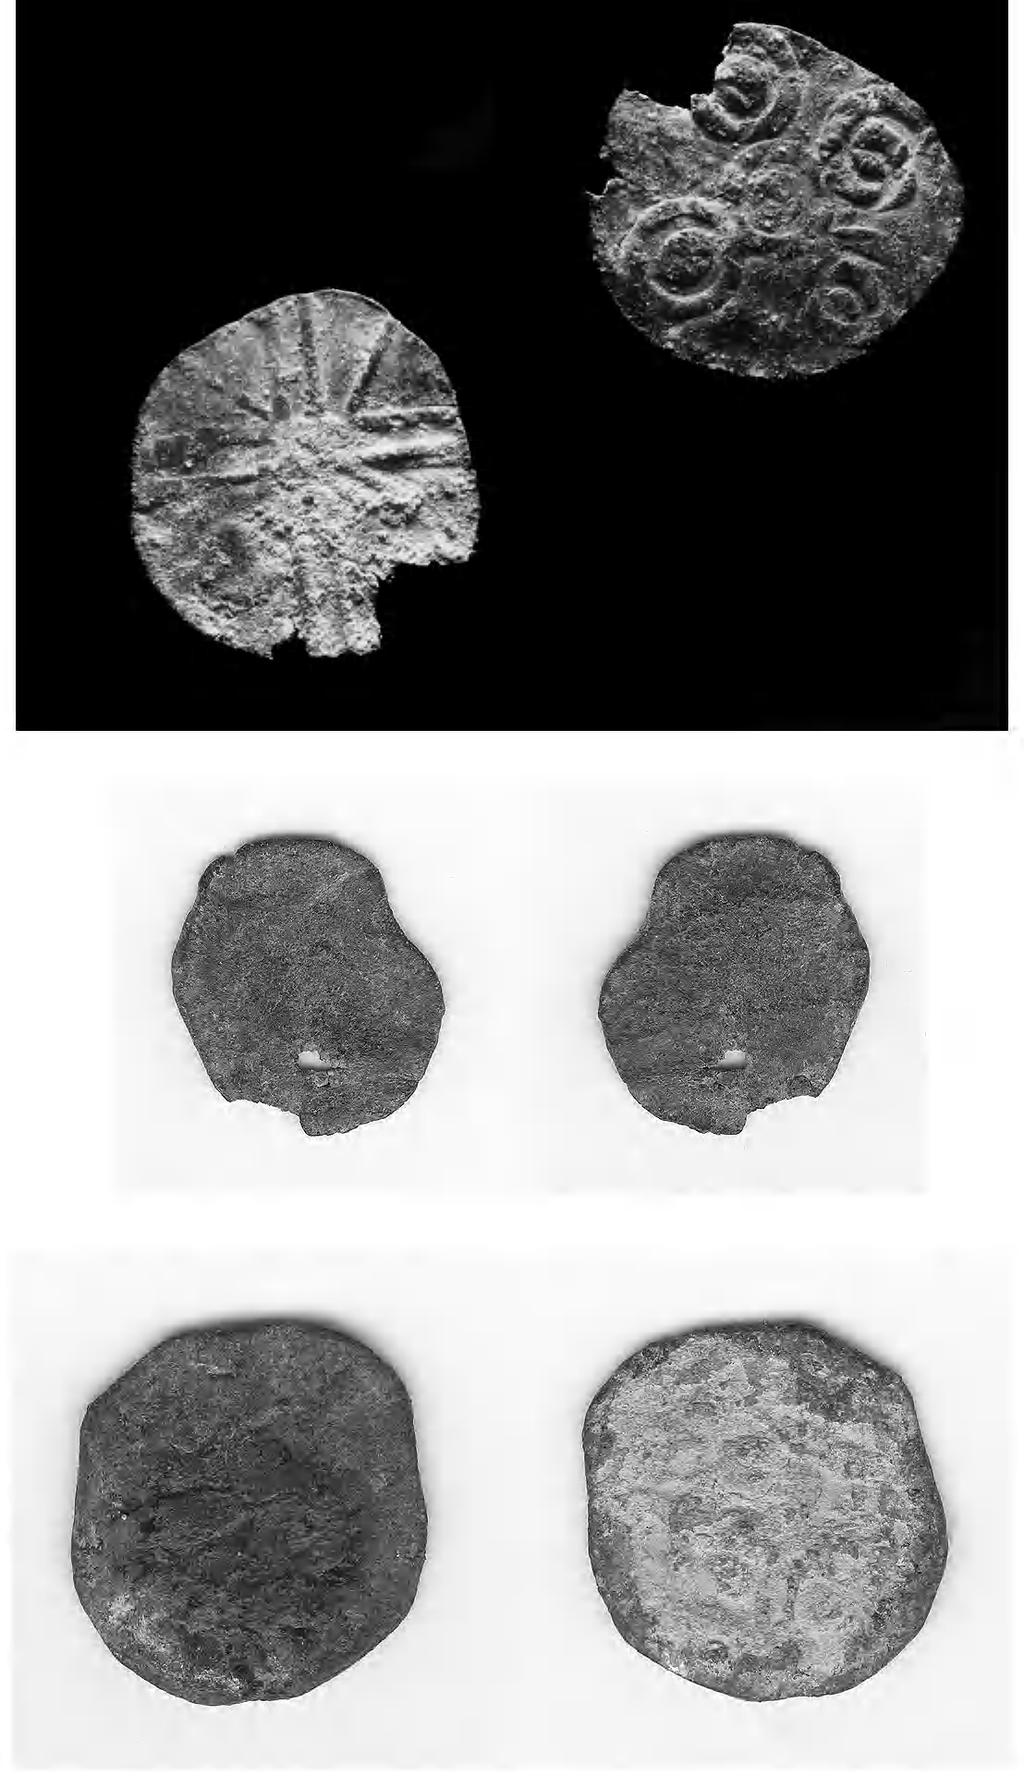 142 RICHARD BRYANT AND CAROLYN HEIGHWAY Fig. 35. 11th-century tokens (scale 2:1). Top SF294; Middle SF336; Bottom SF250.